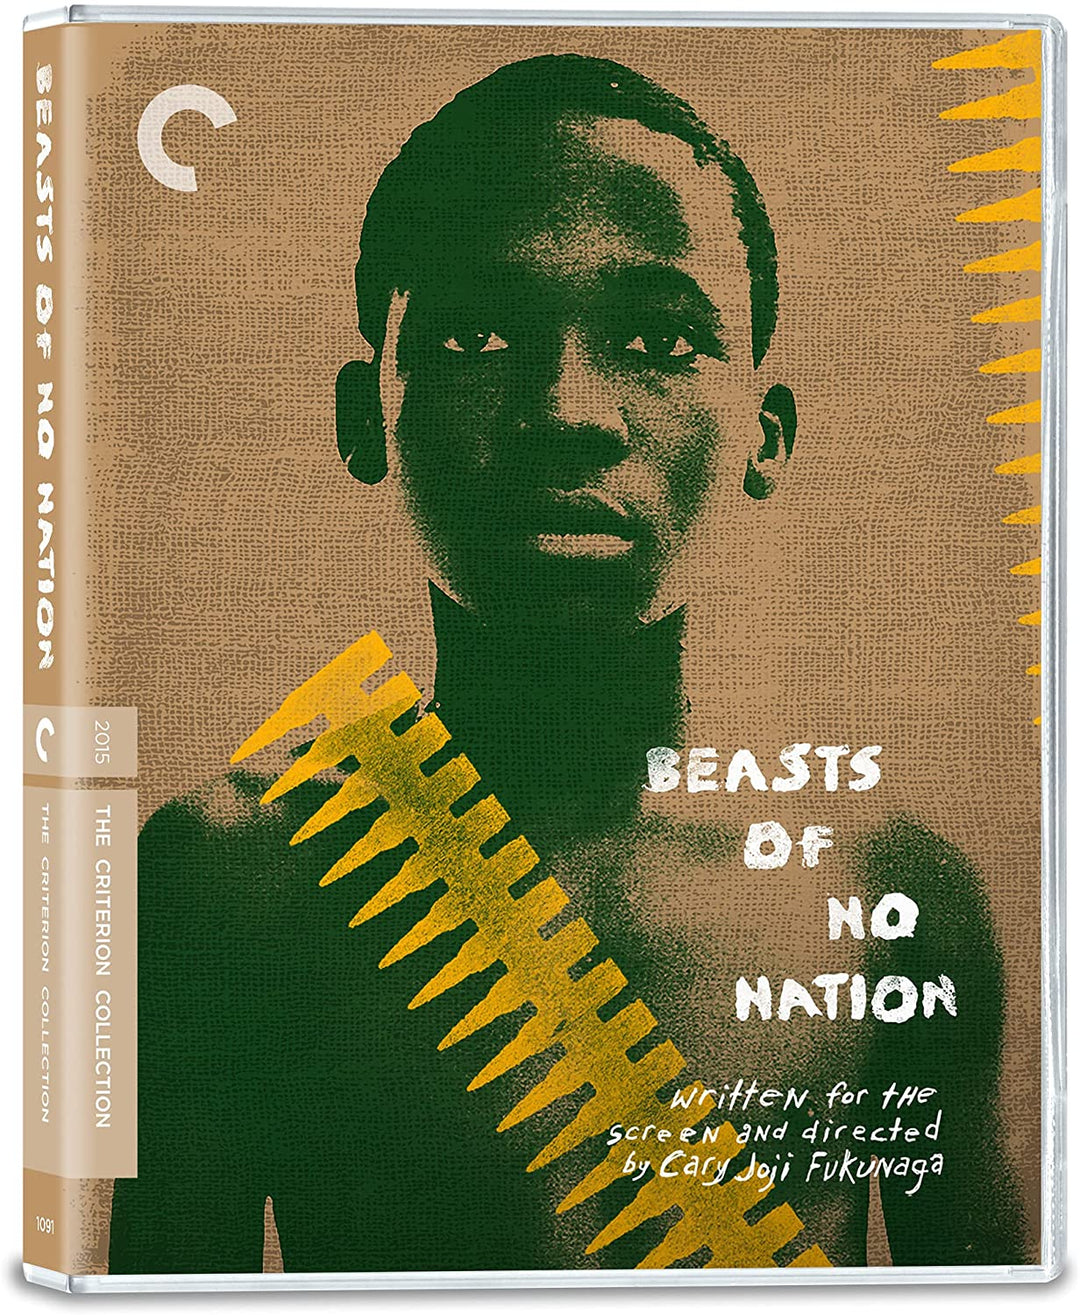 Beasts Of No Nation (2015) (Criterion Collection) UK Only - War/Drama [BLu-ray]